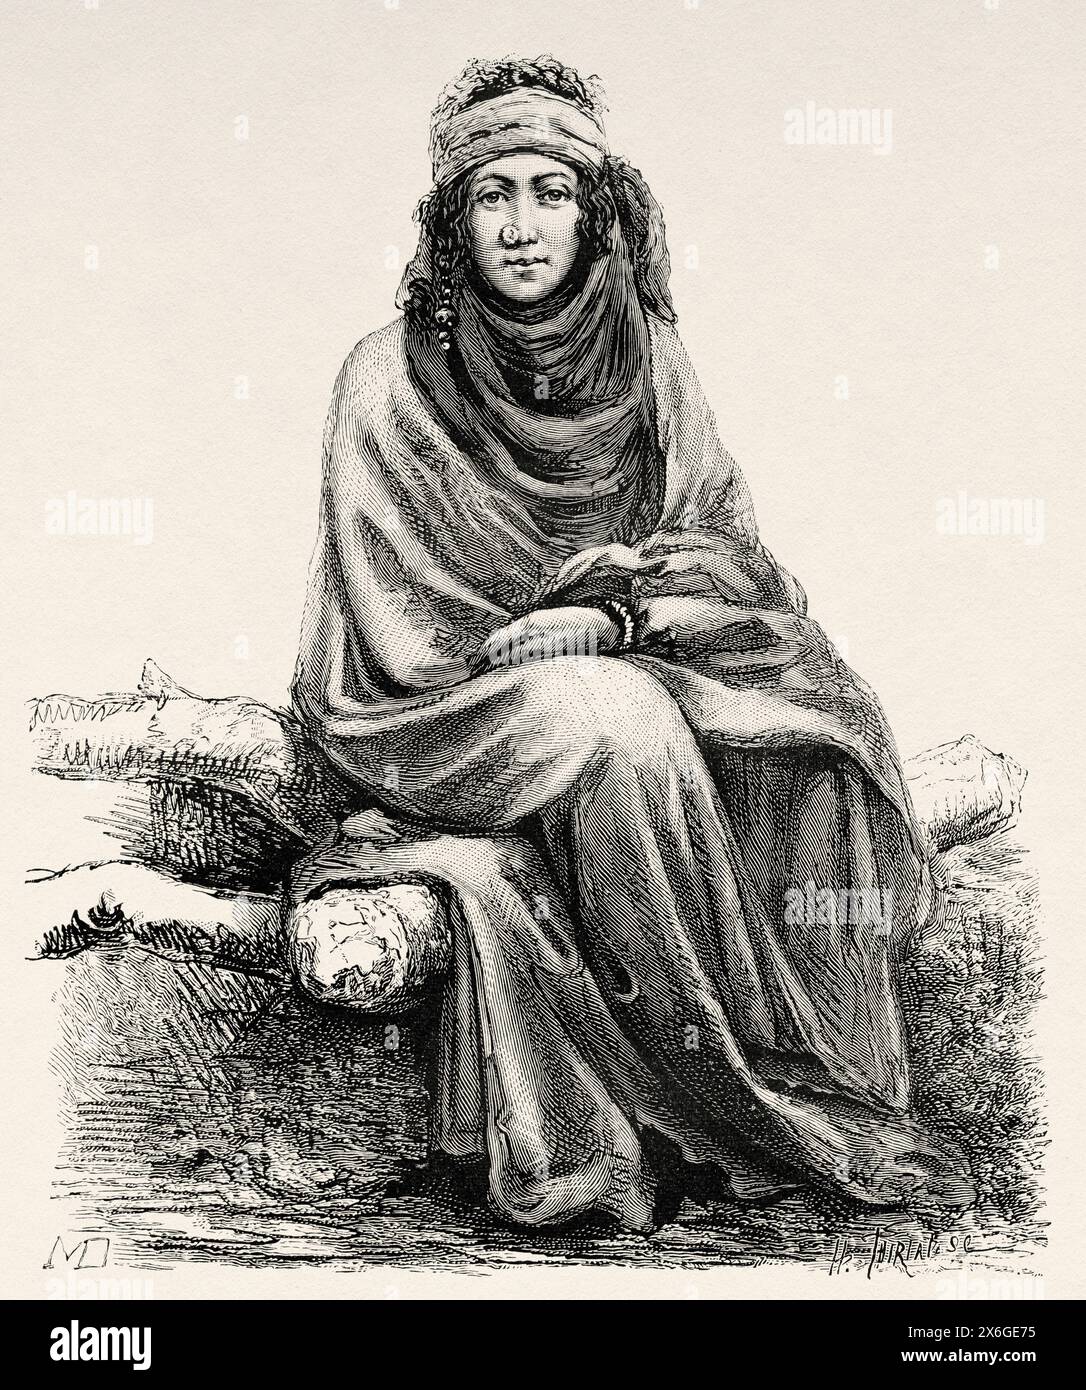 Arab woman from the Banu Lam tribe, Iraq. Middle East. Drawing by Jane Dieulafoy. Persia, Chaldea and Susiana 1881-1882 by Jane Dieulafoy (1851 - 1916) Le Tour du Monde 1886 Stock Photo